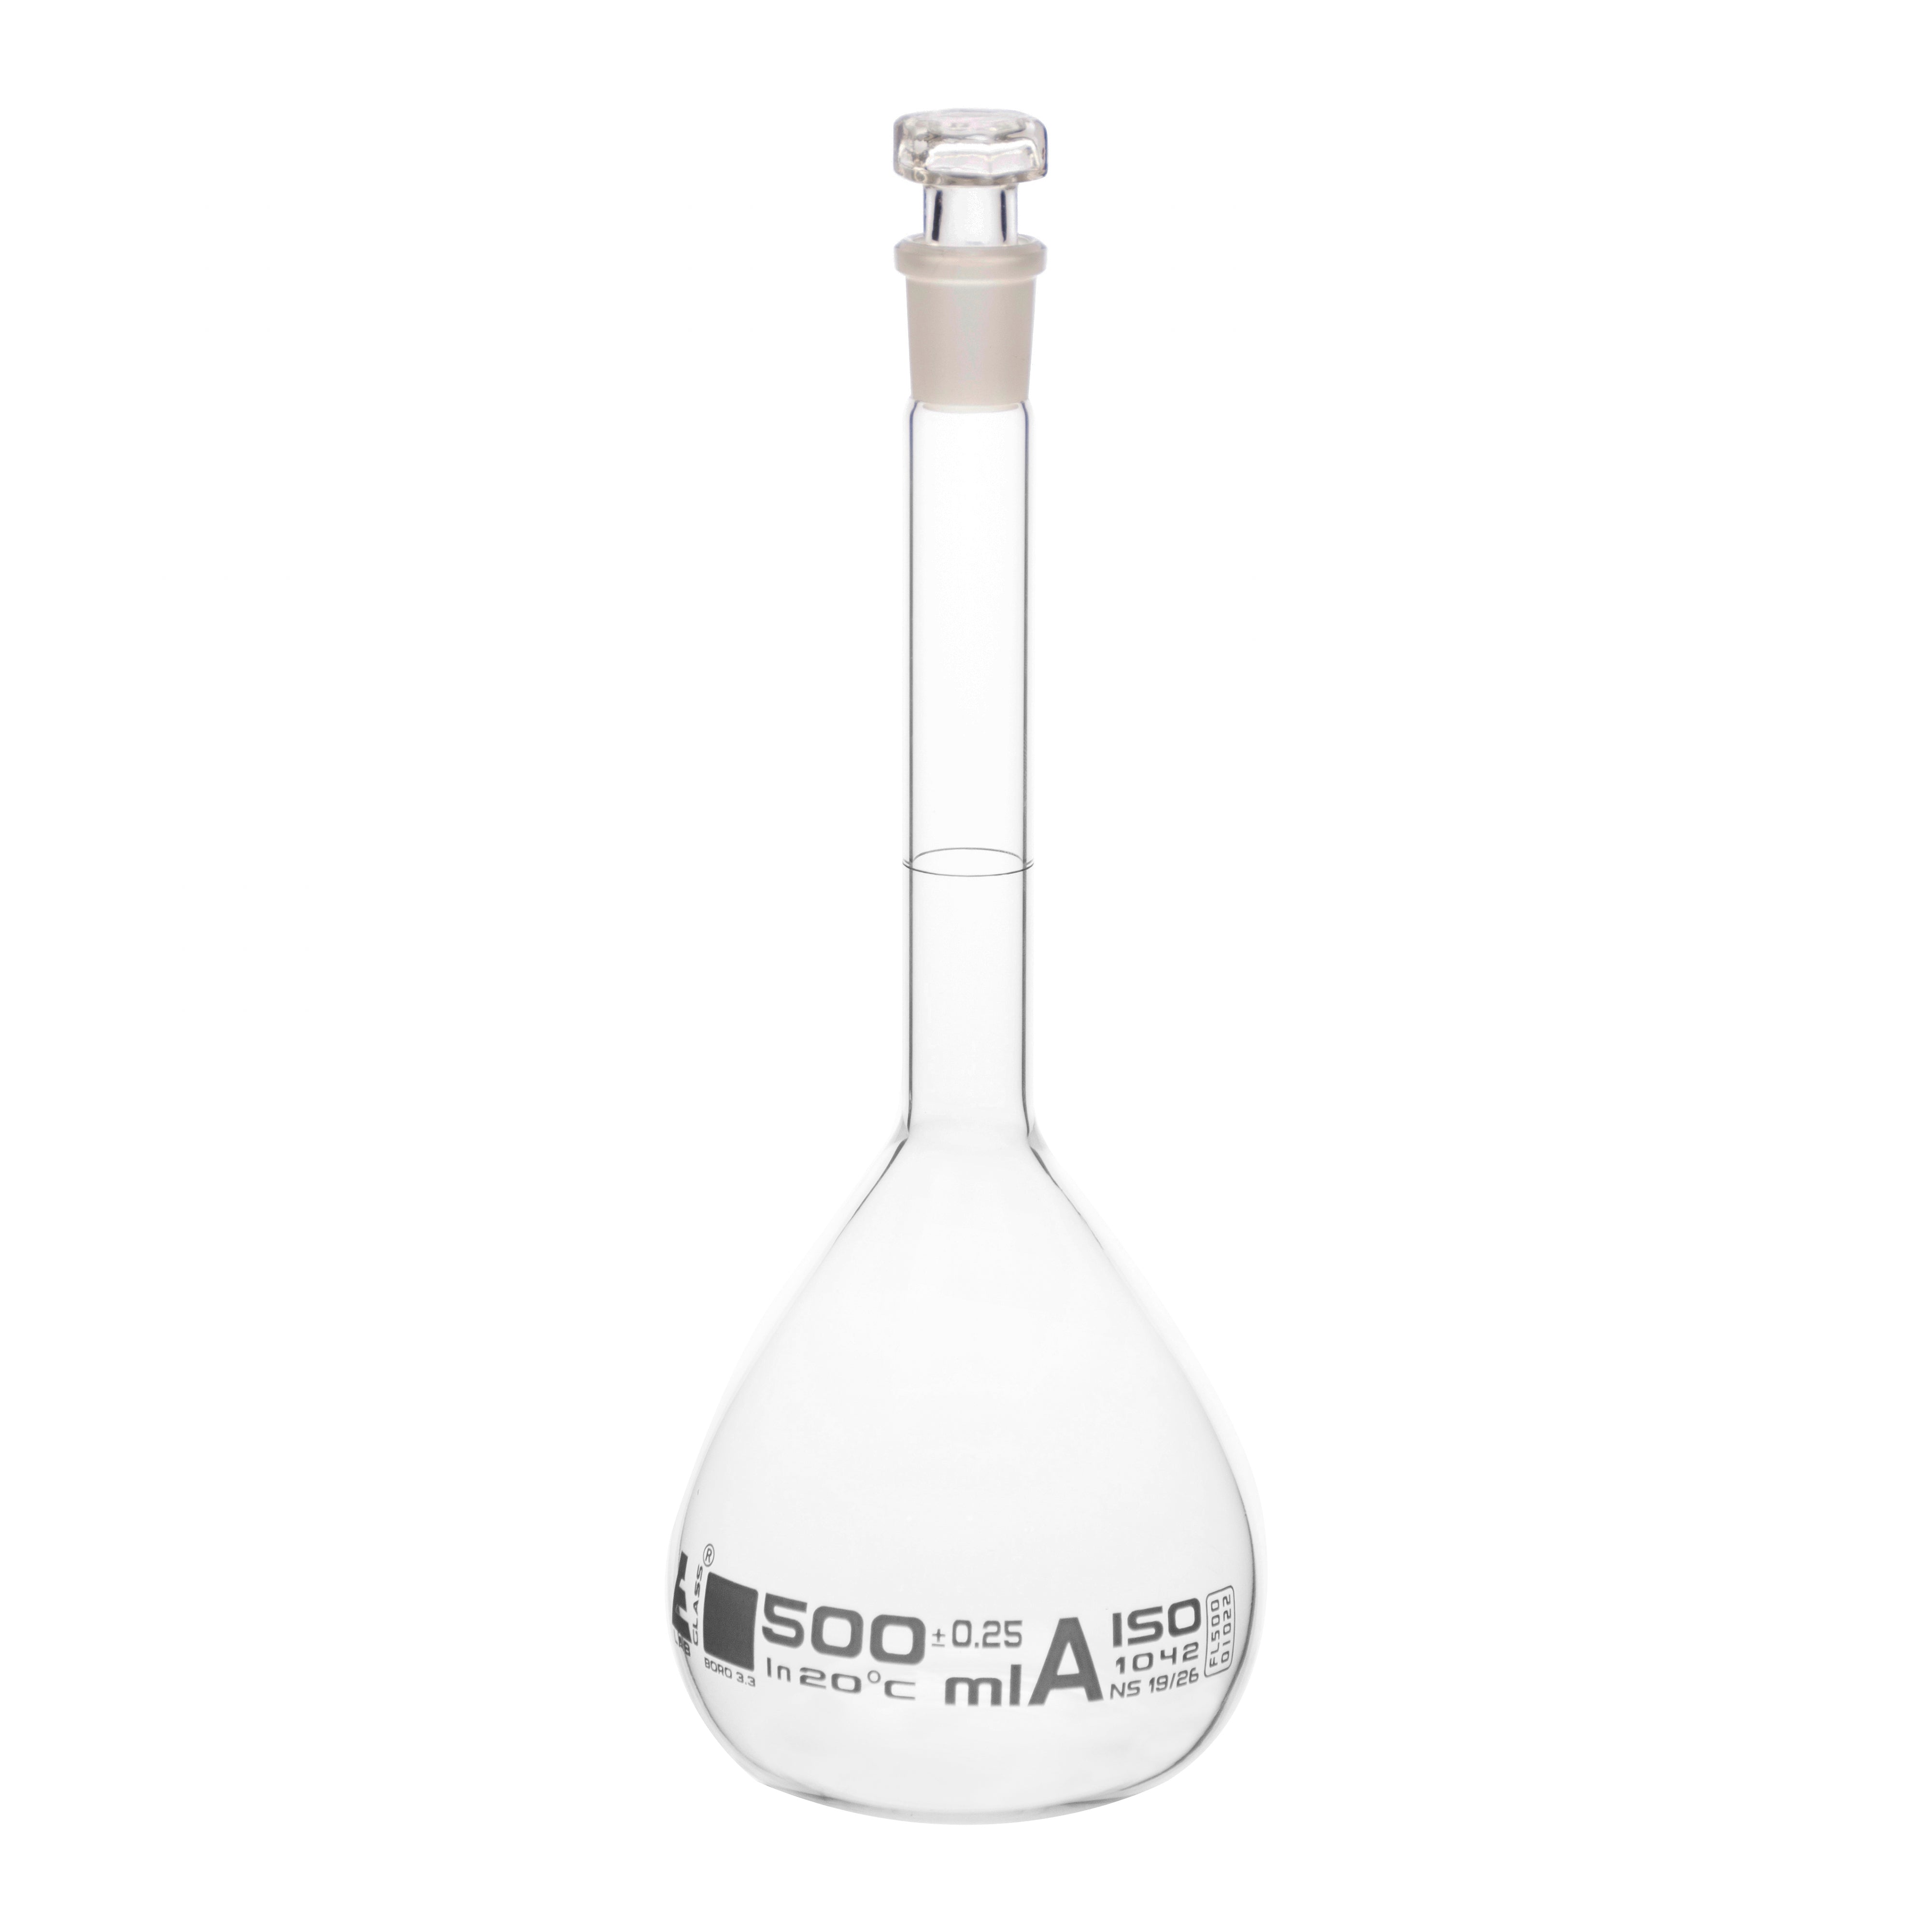 Borosilicate Volumetric Flask with Hollow Glass Stopper, 500ml, Class A, White Print, Autoclavable